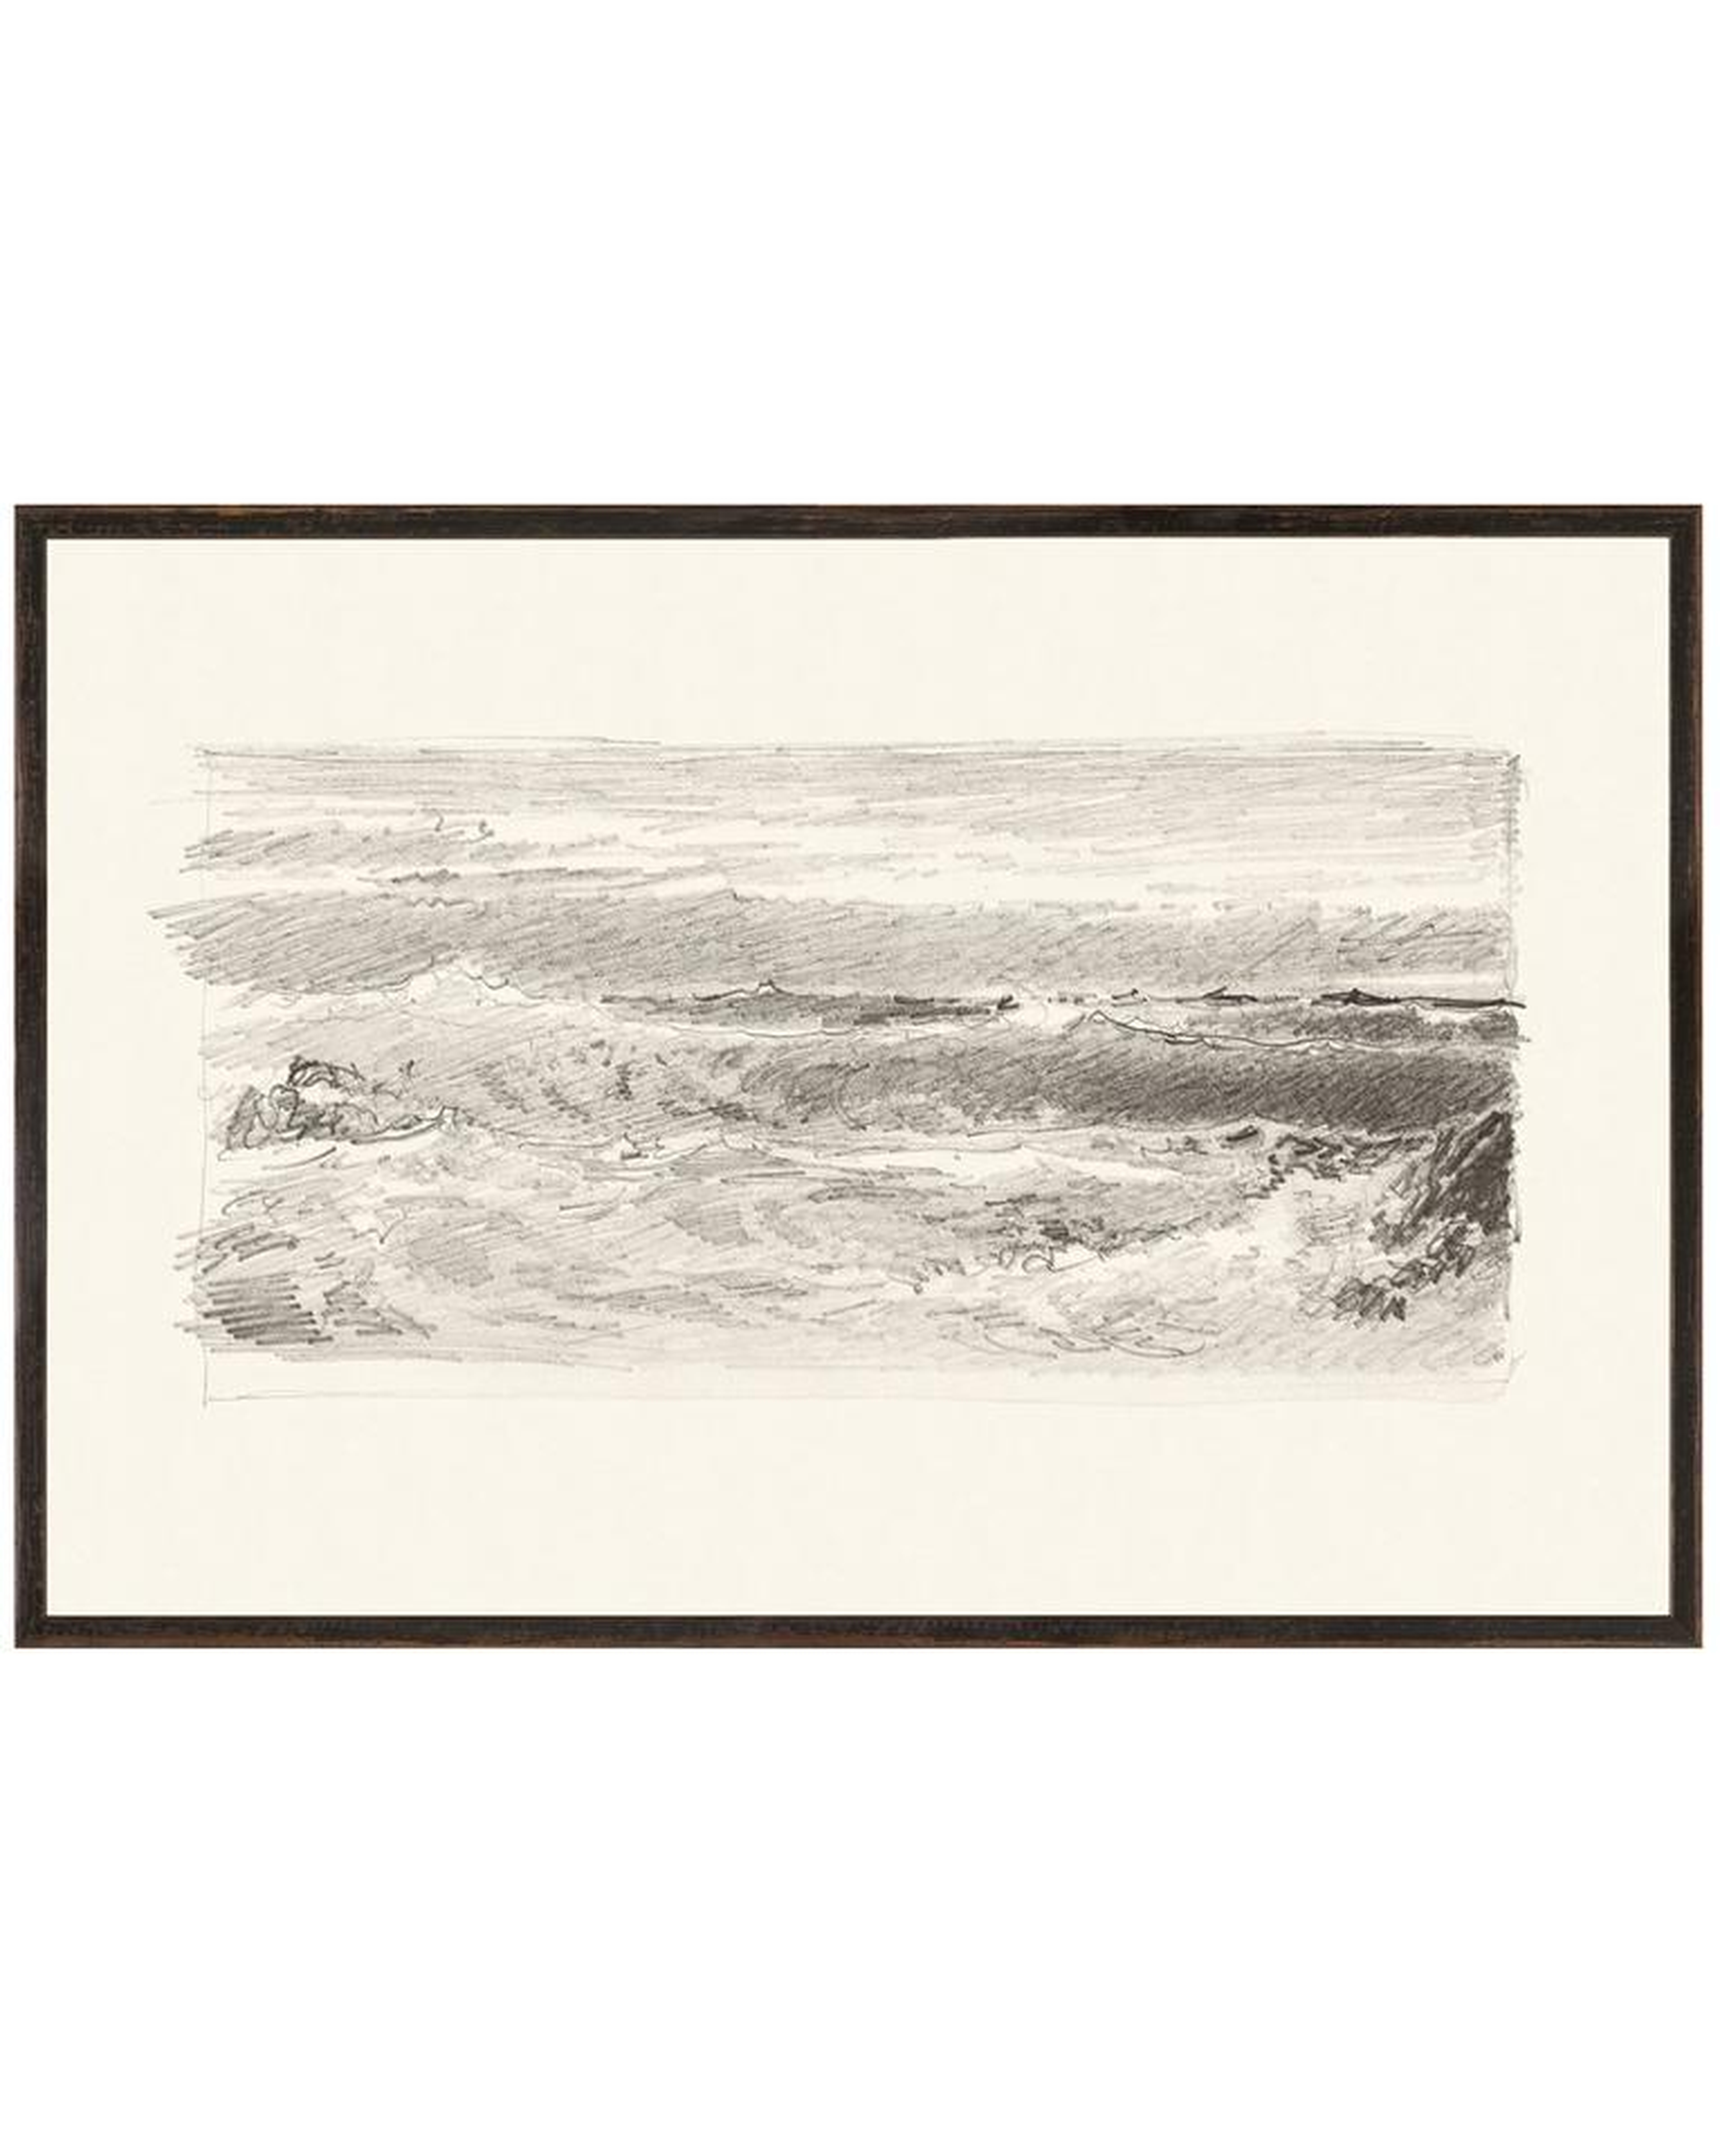 Sketched Seascape, Wall Art, 31" x 21" - McGee & Co.